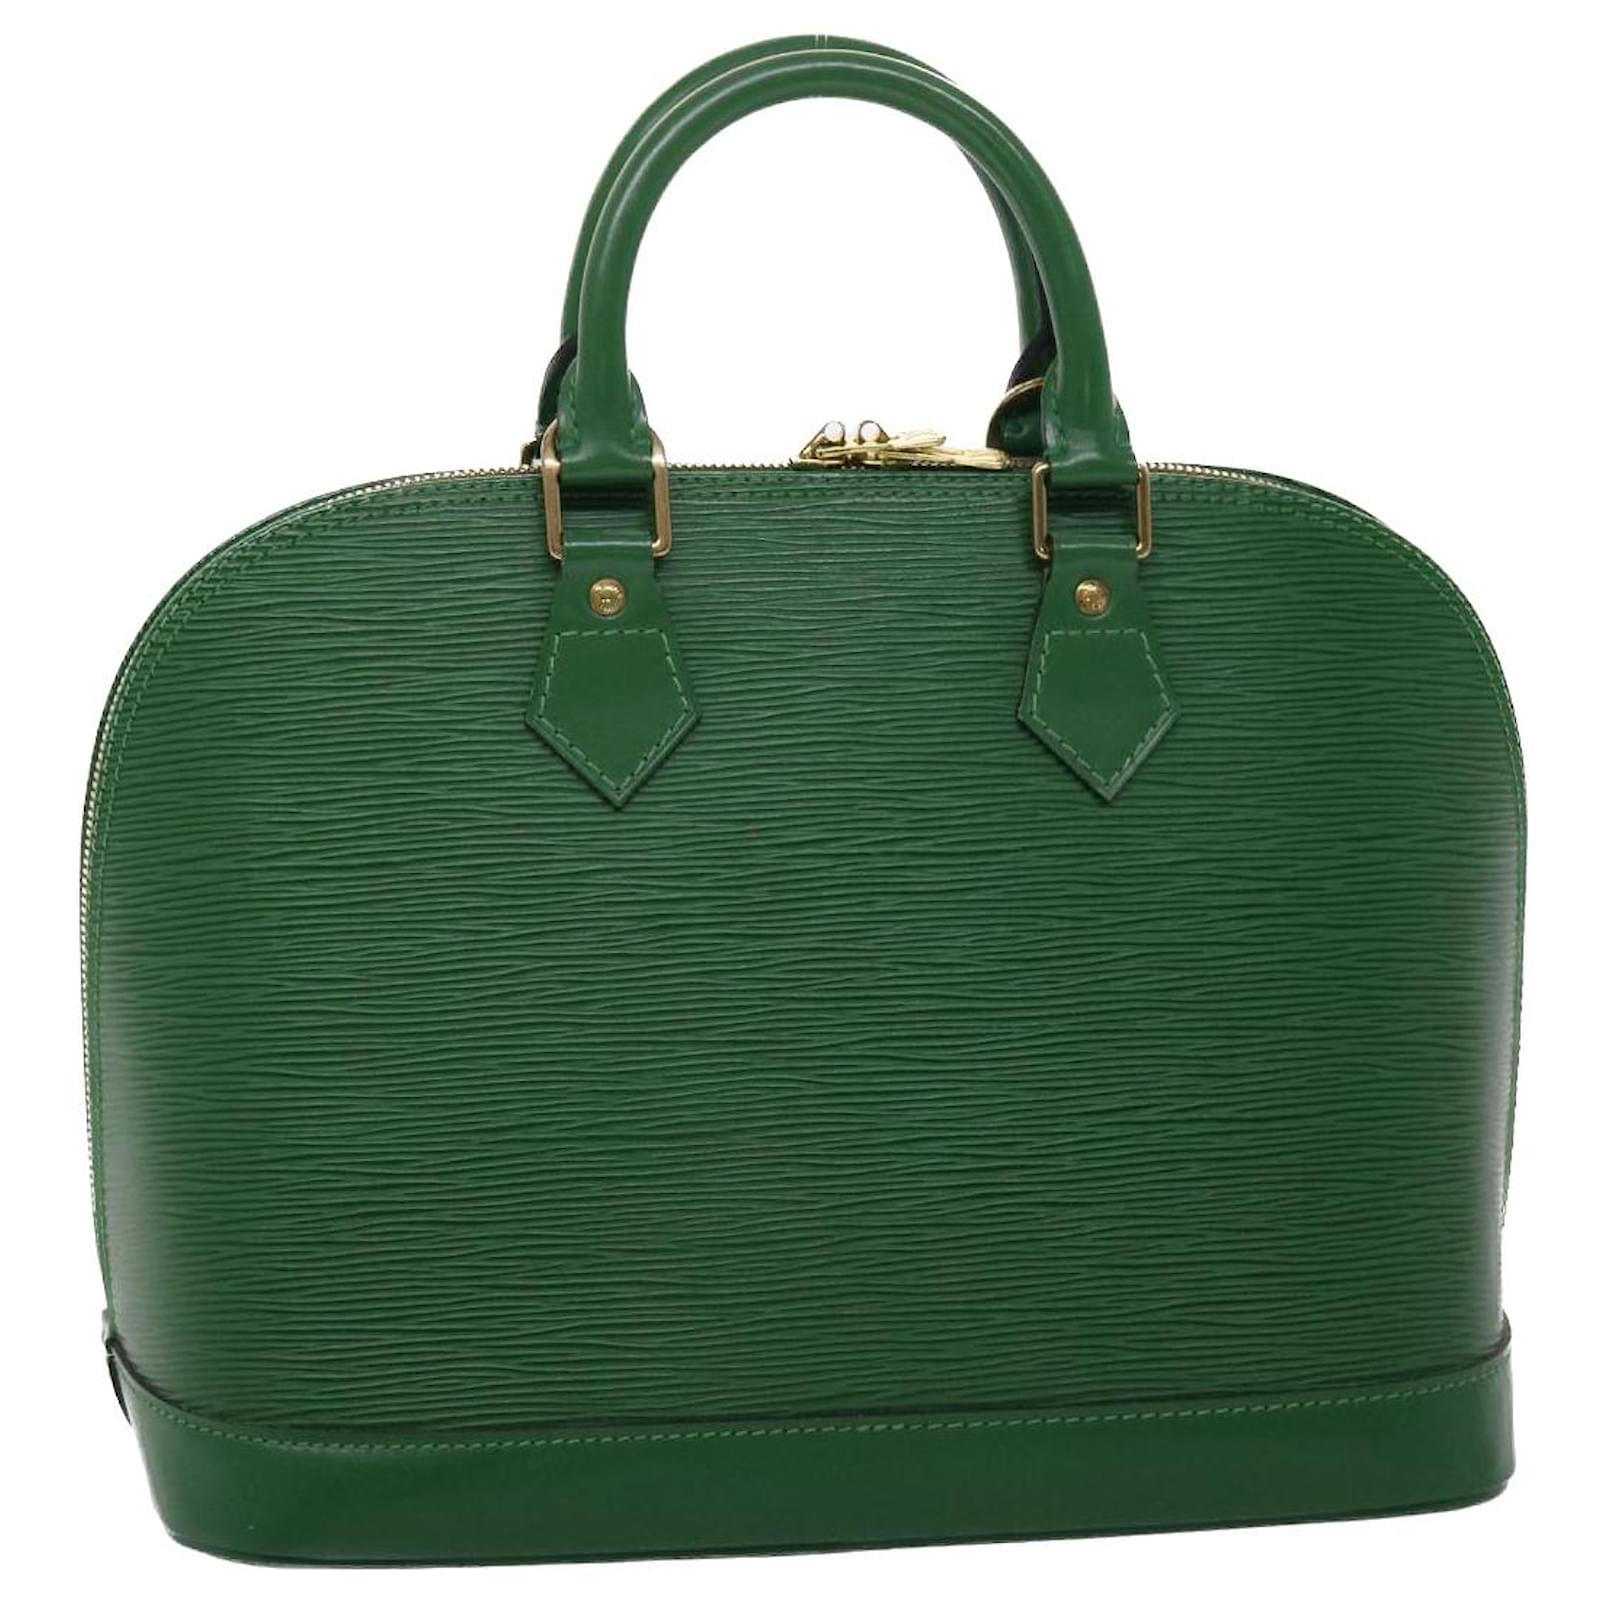 Green Louis Vuitton Alma bag. The perfect size and shape for